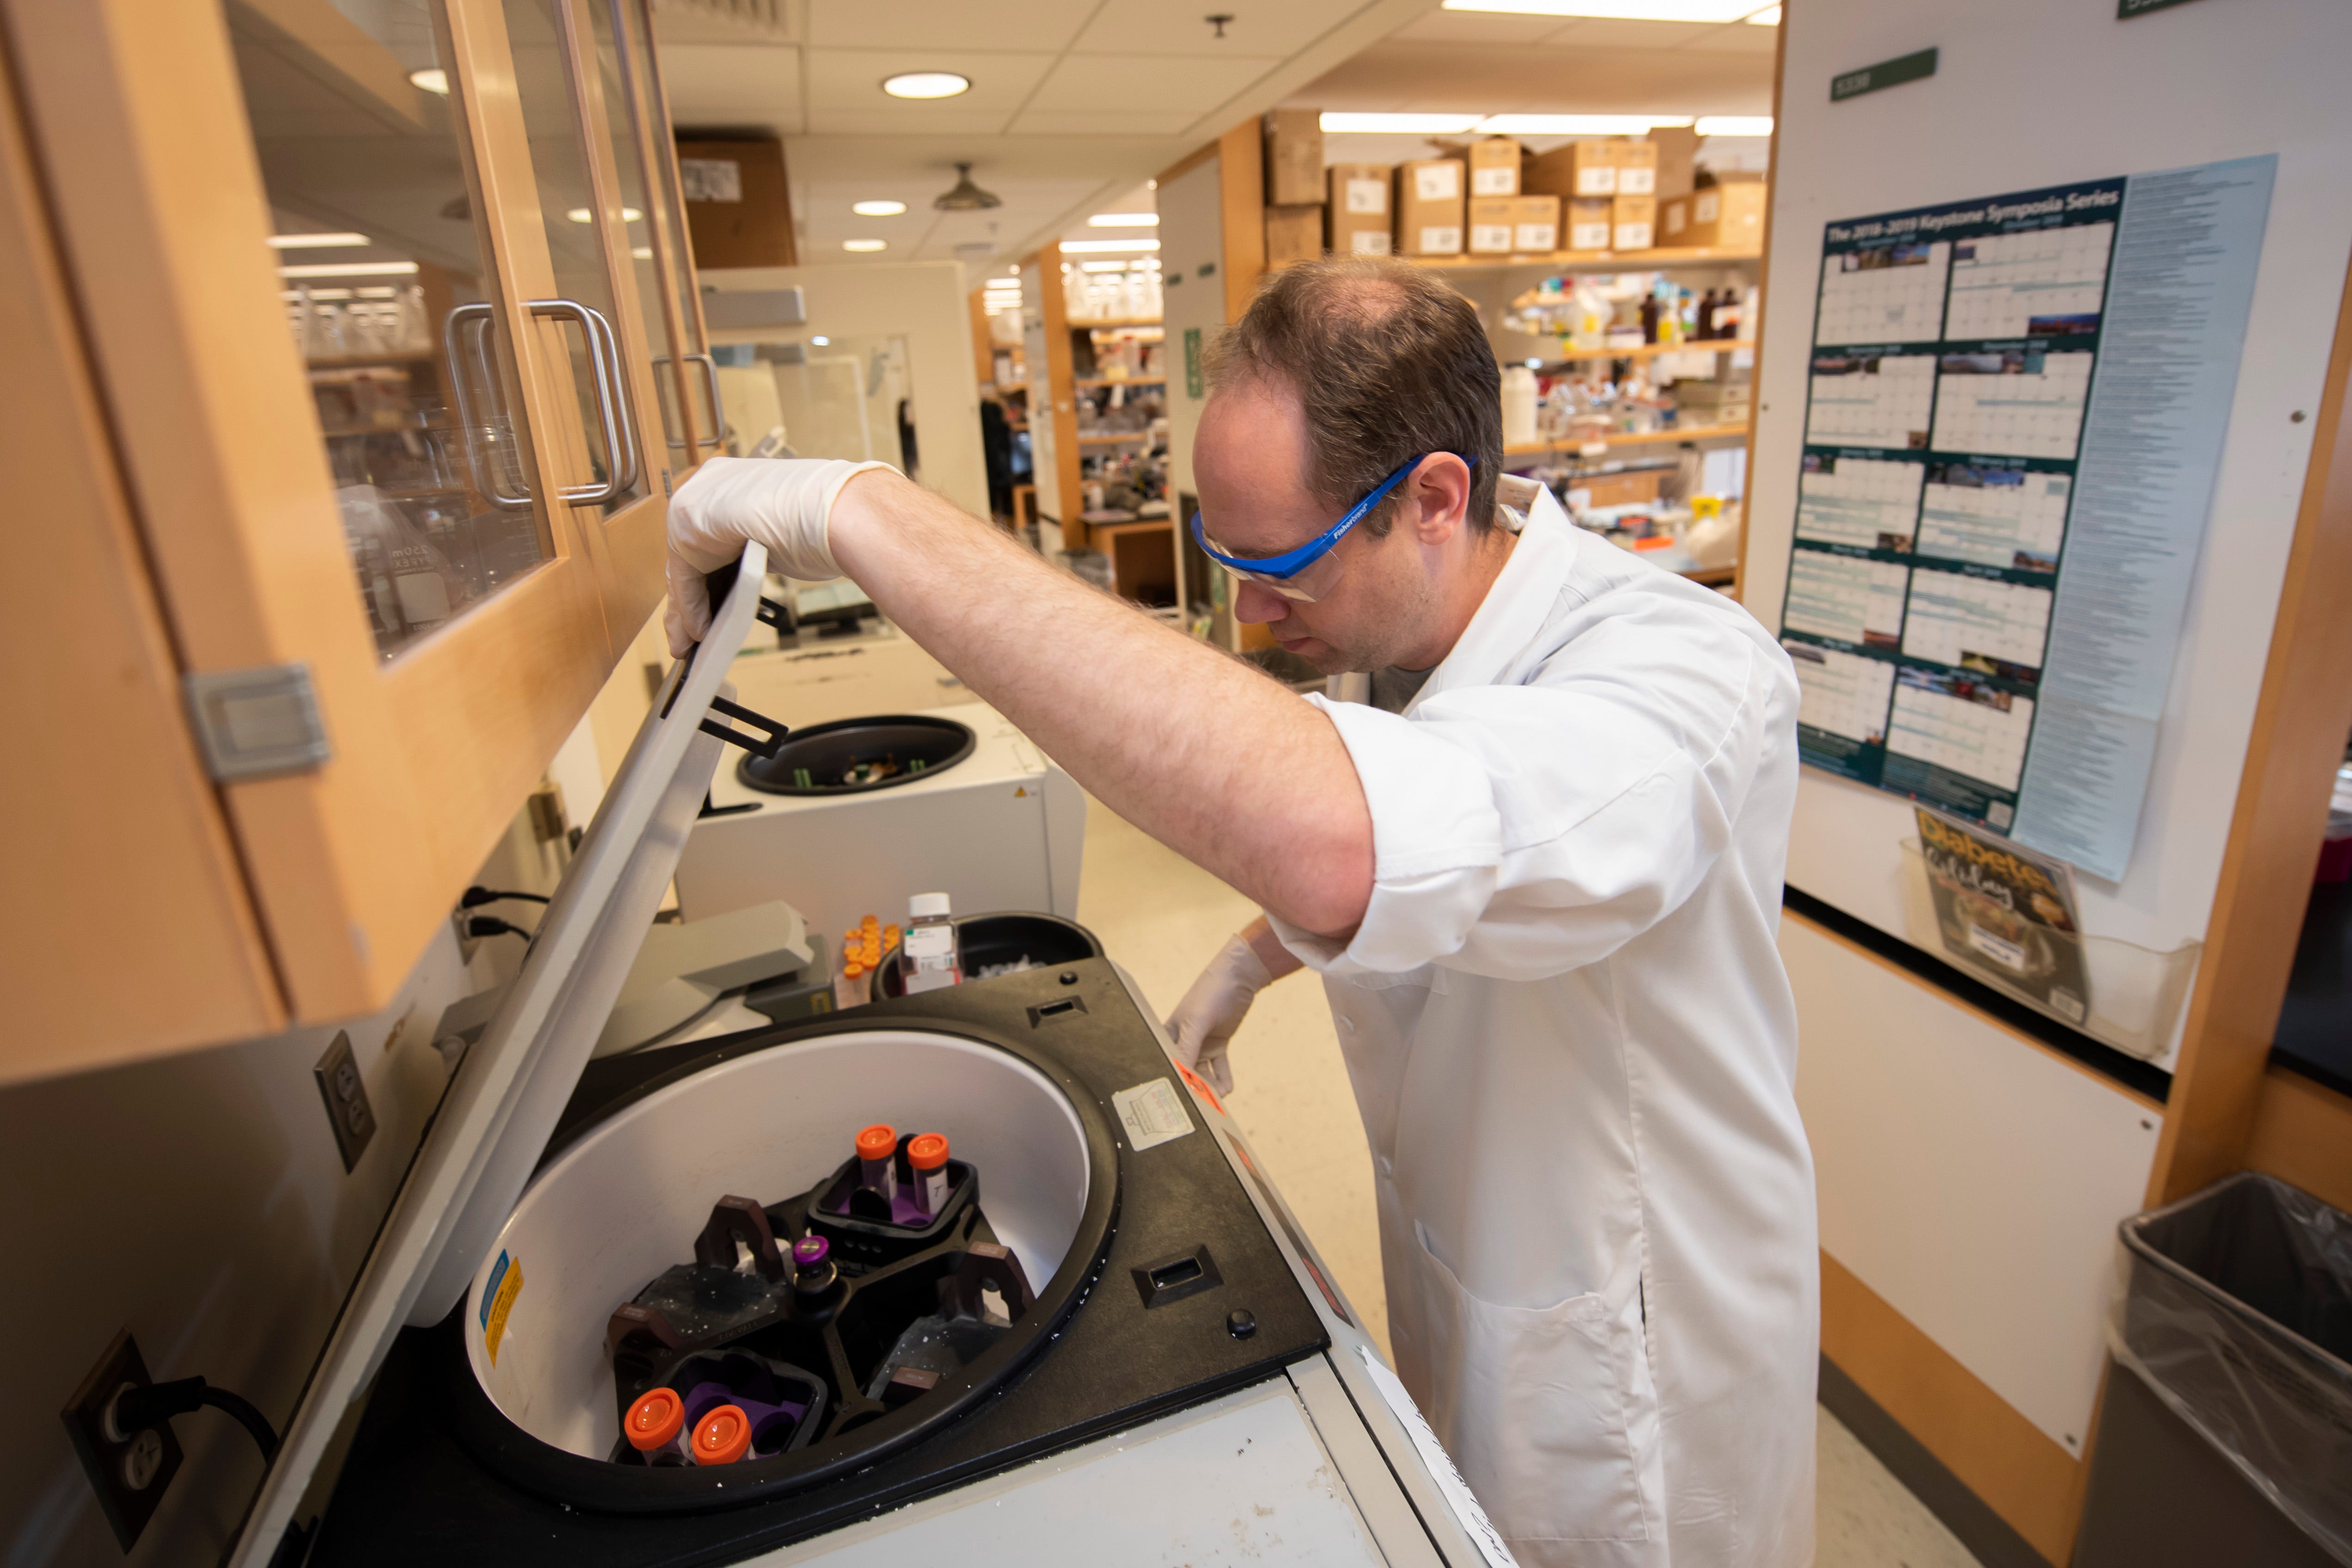 Research investigator Ben Murdock uses a centrifuge to help isolate immune cells from spinal cord tissue at the Program for Neurology Research and Discovery inside the Taubman Biomedical Science Research Building at the University of Michigan in Ann Arbor.